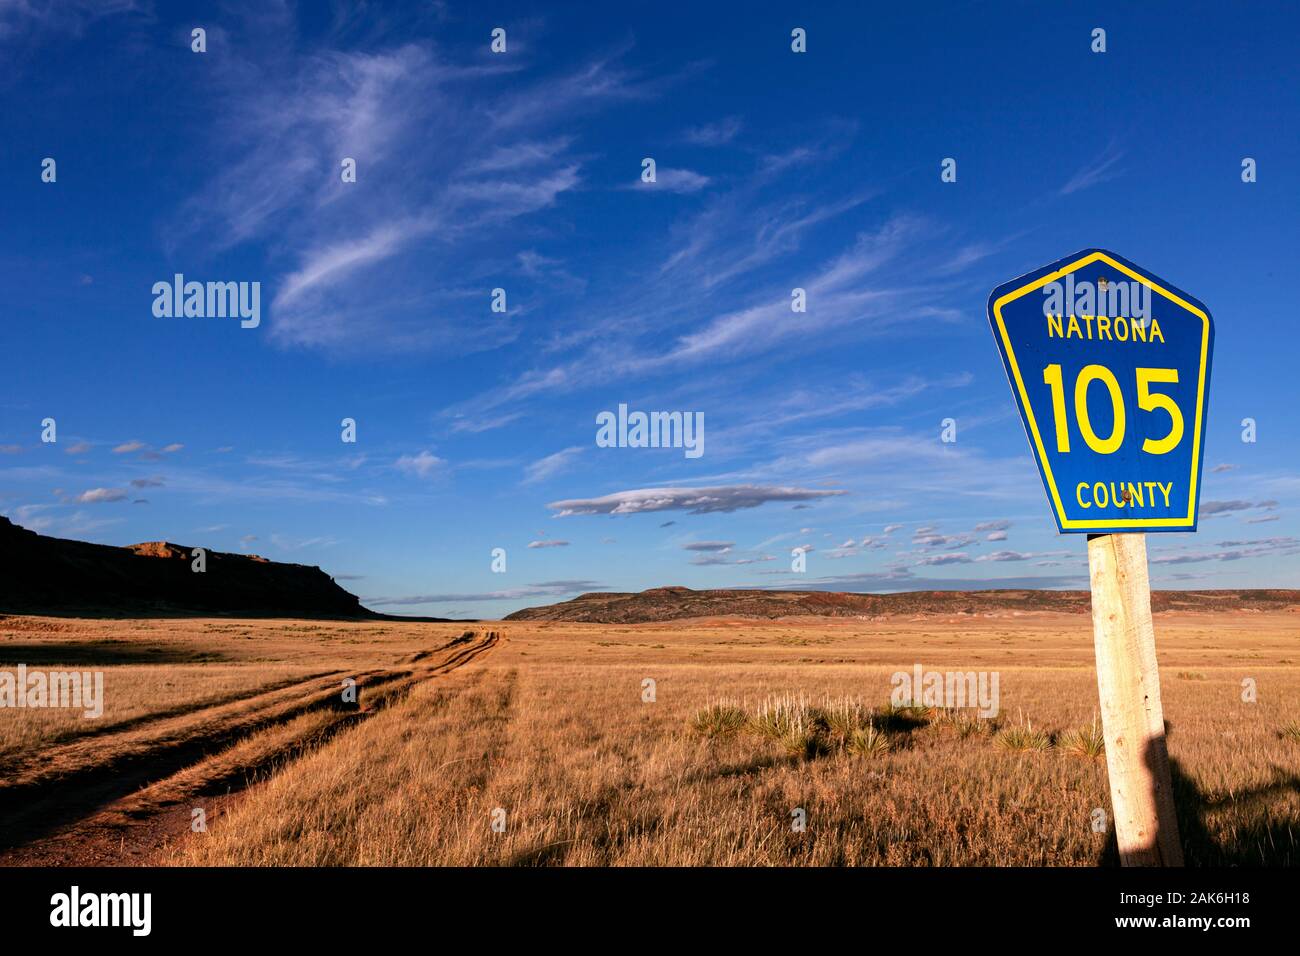 WY04129-00...WYOMING - Natrona County Road 105 is a rutted dirt road that cust across open grass lands. Stock Photo